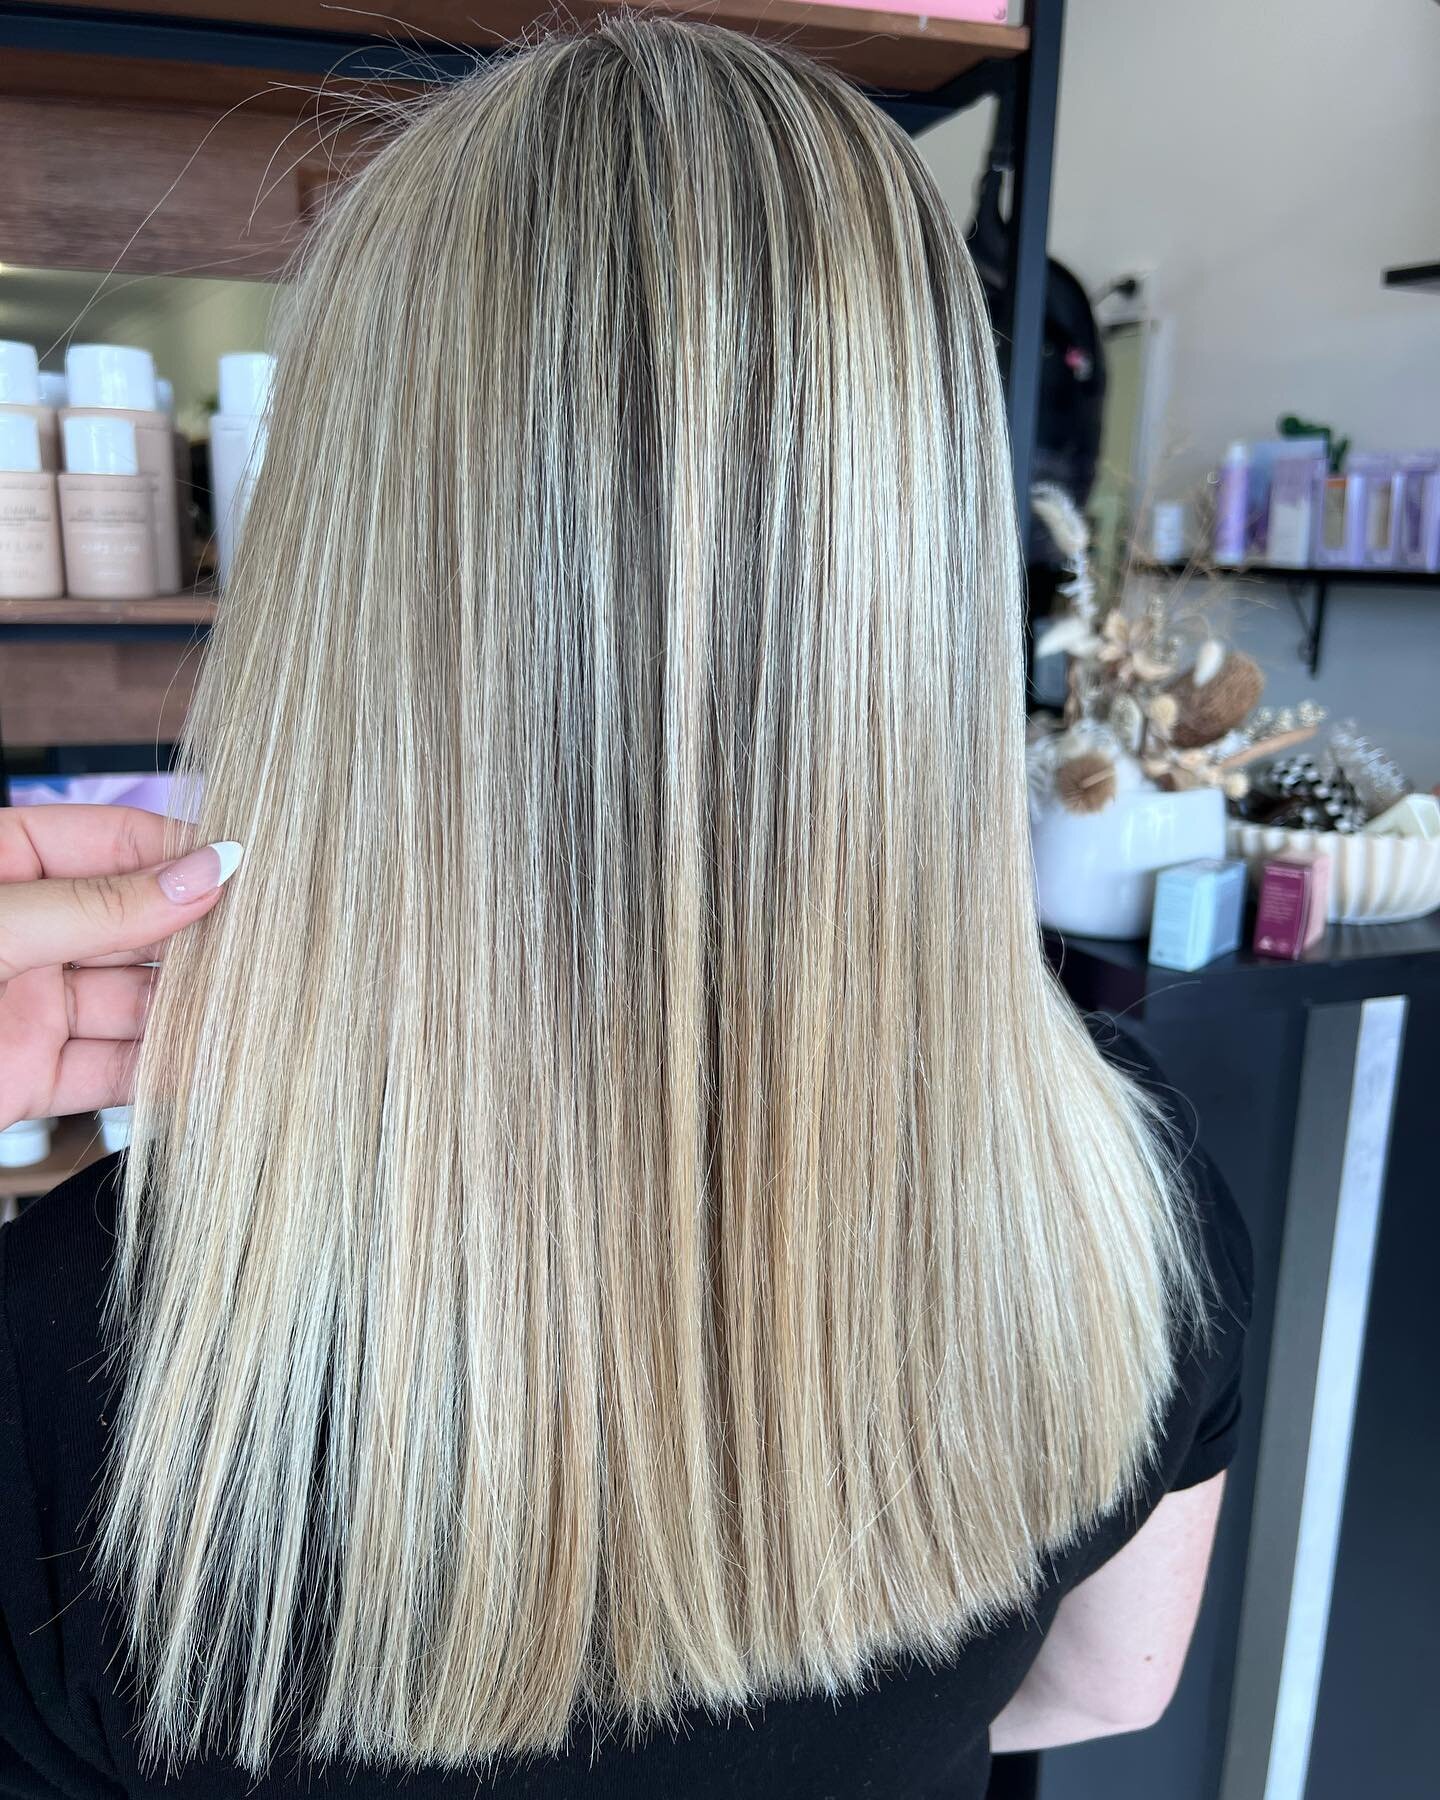 Blends of creamy perfection 🫶🏼🤭
Stunning brighten up created by salon owner @ange_thehairshack 🥳🤩